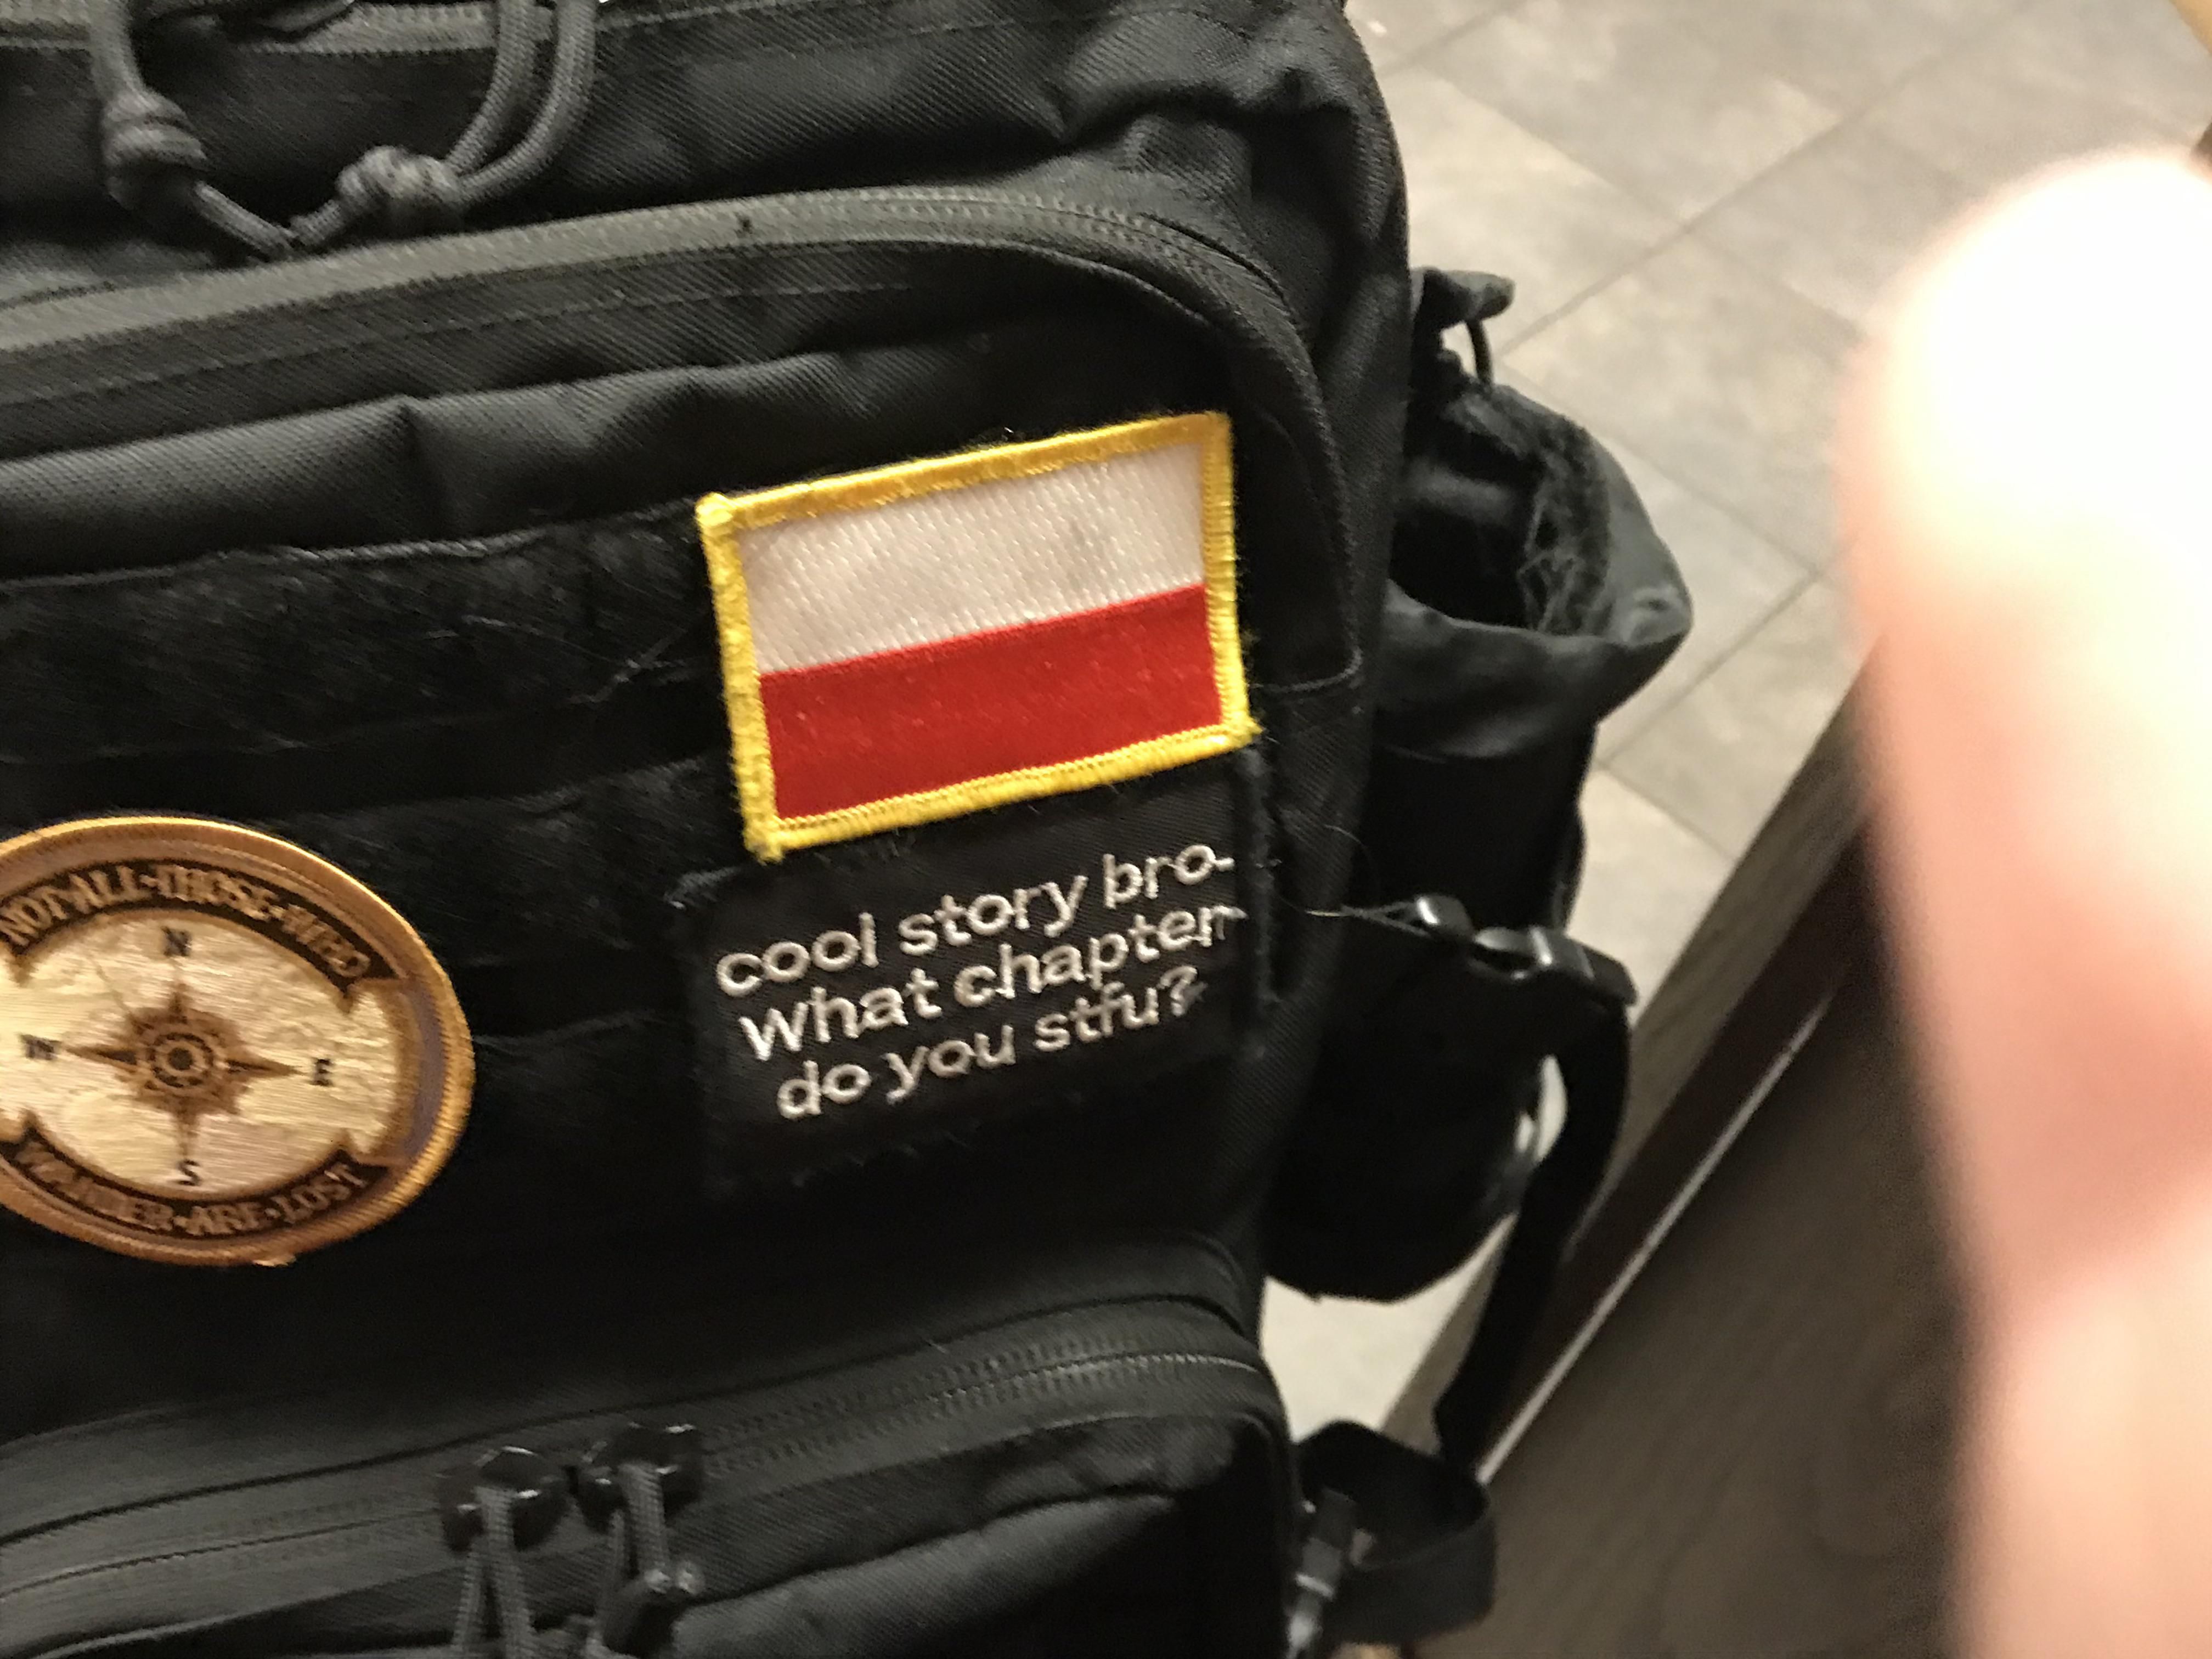 Someone at my work has this on there backpack and it just made my day